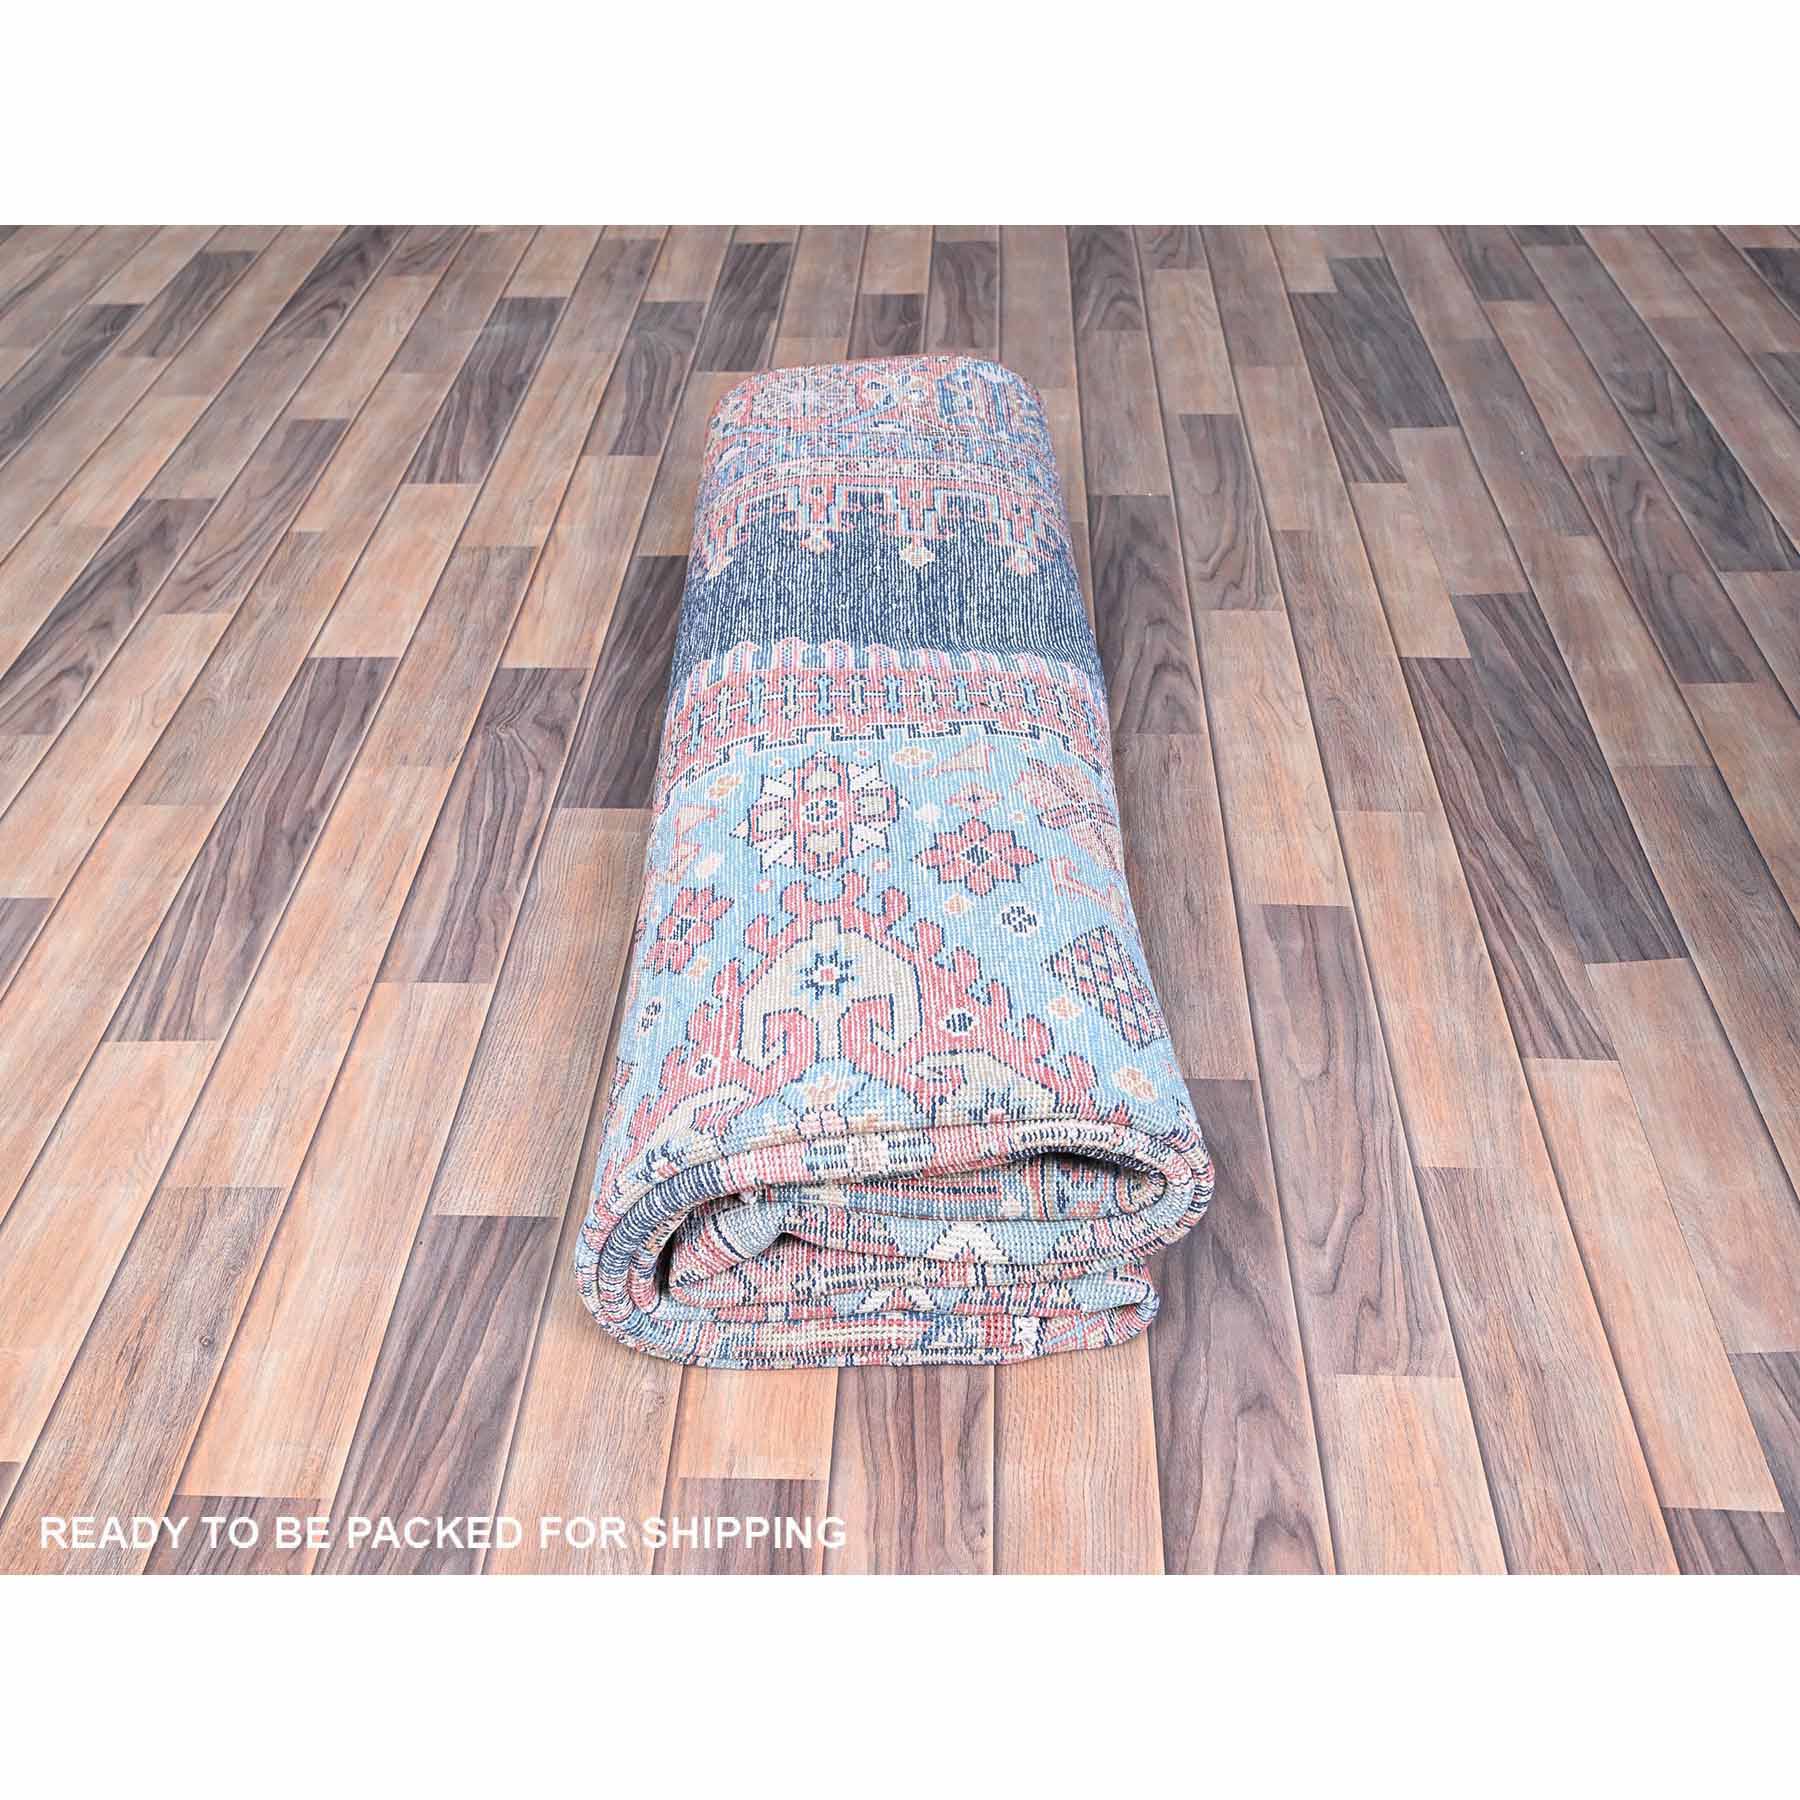 Overdyed-Vintage-Hand-Knotted-Rug-427665